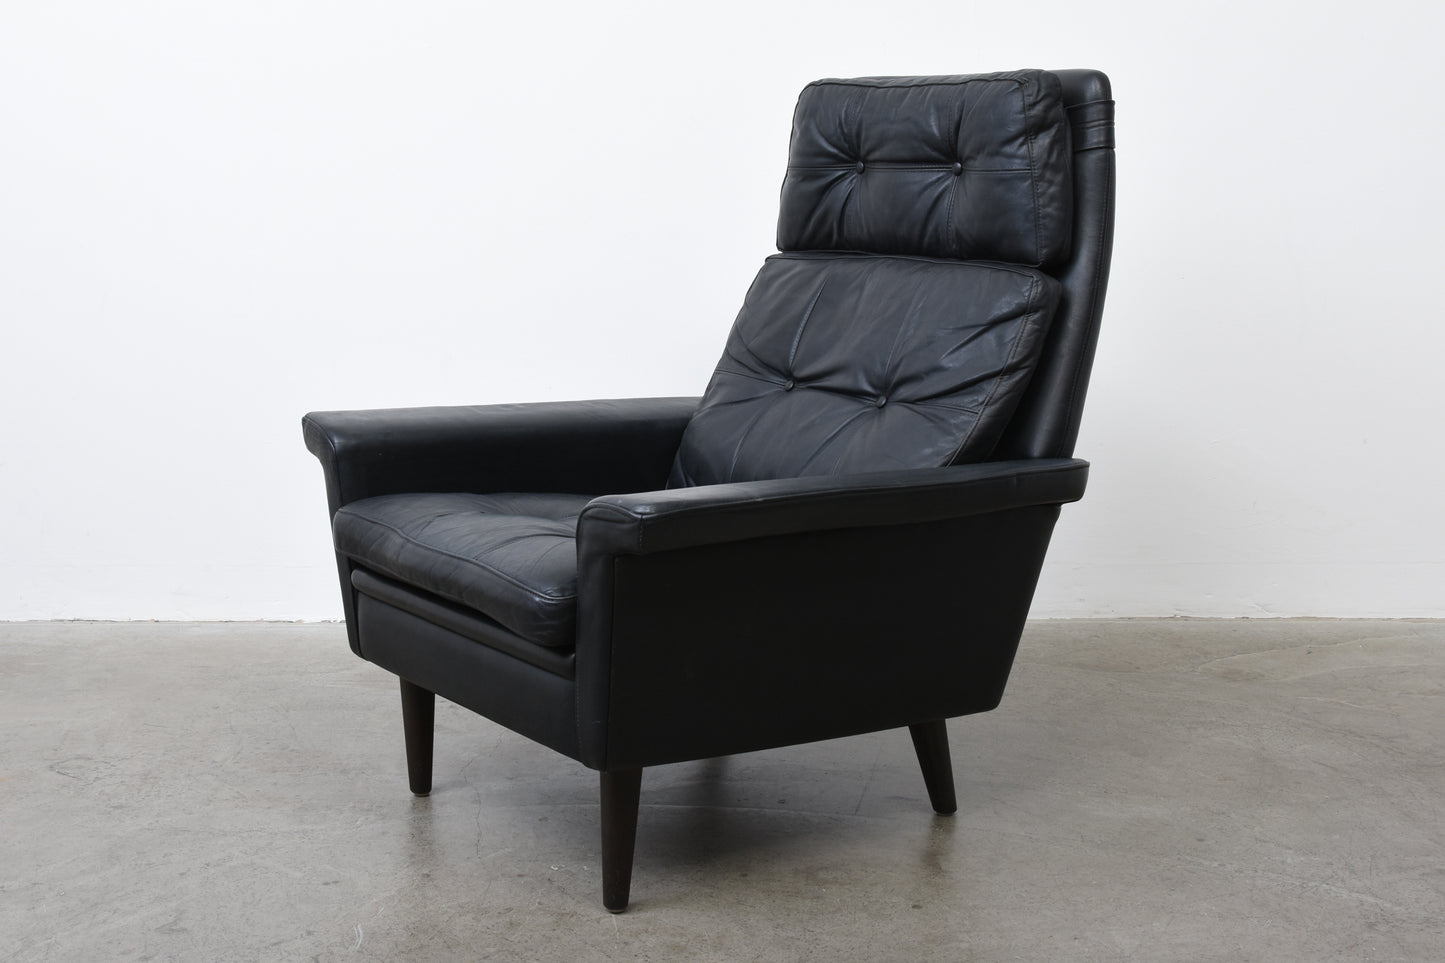 1960s high back leather lounger